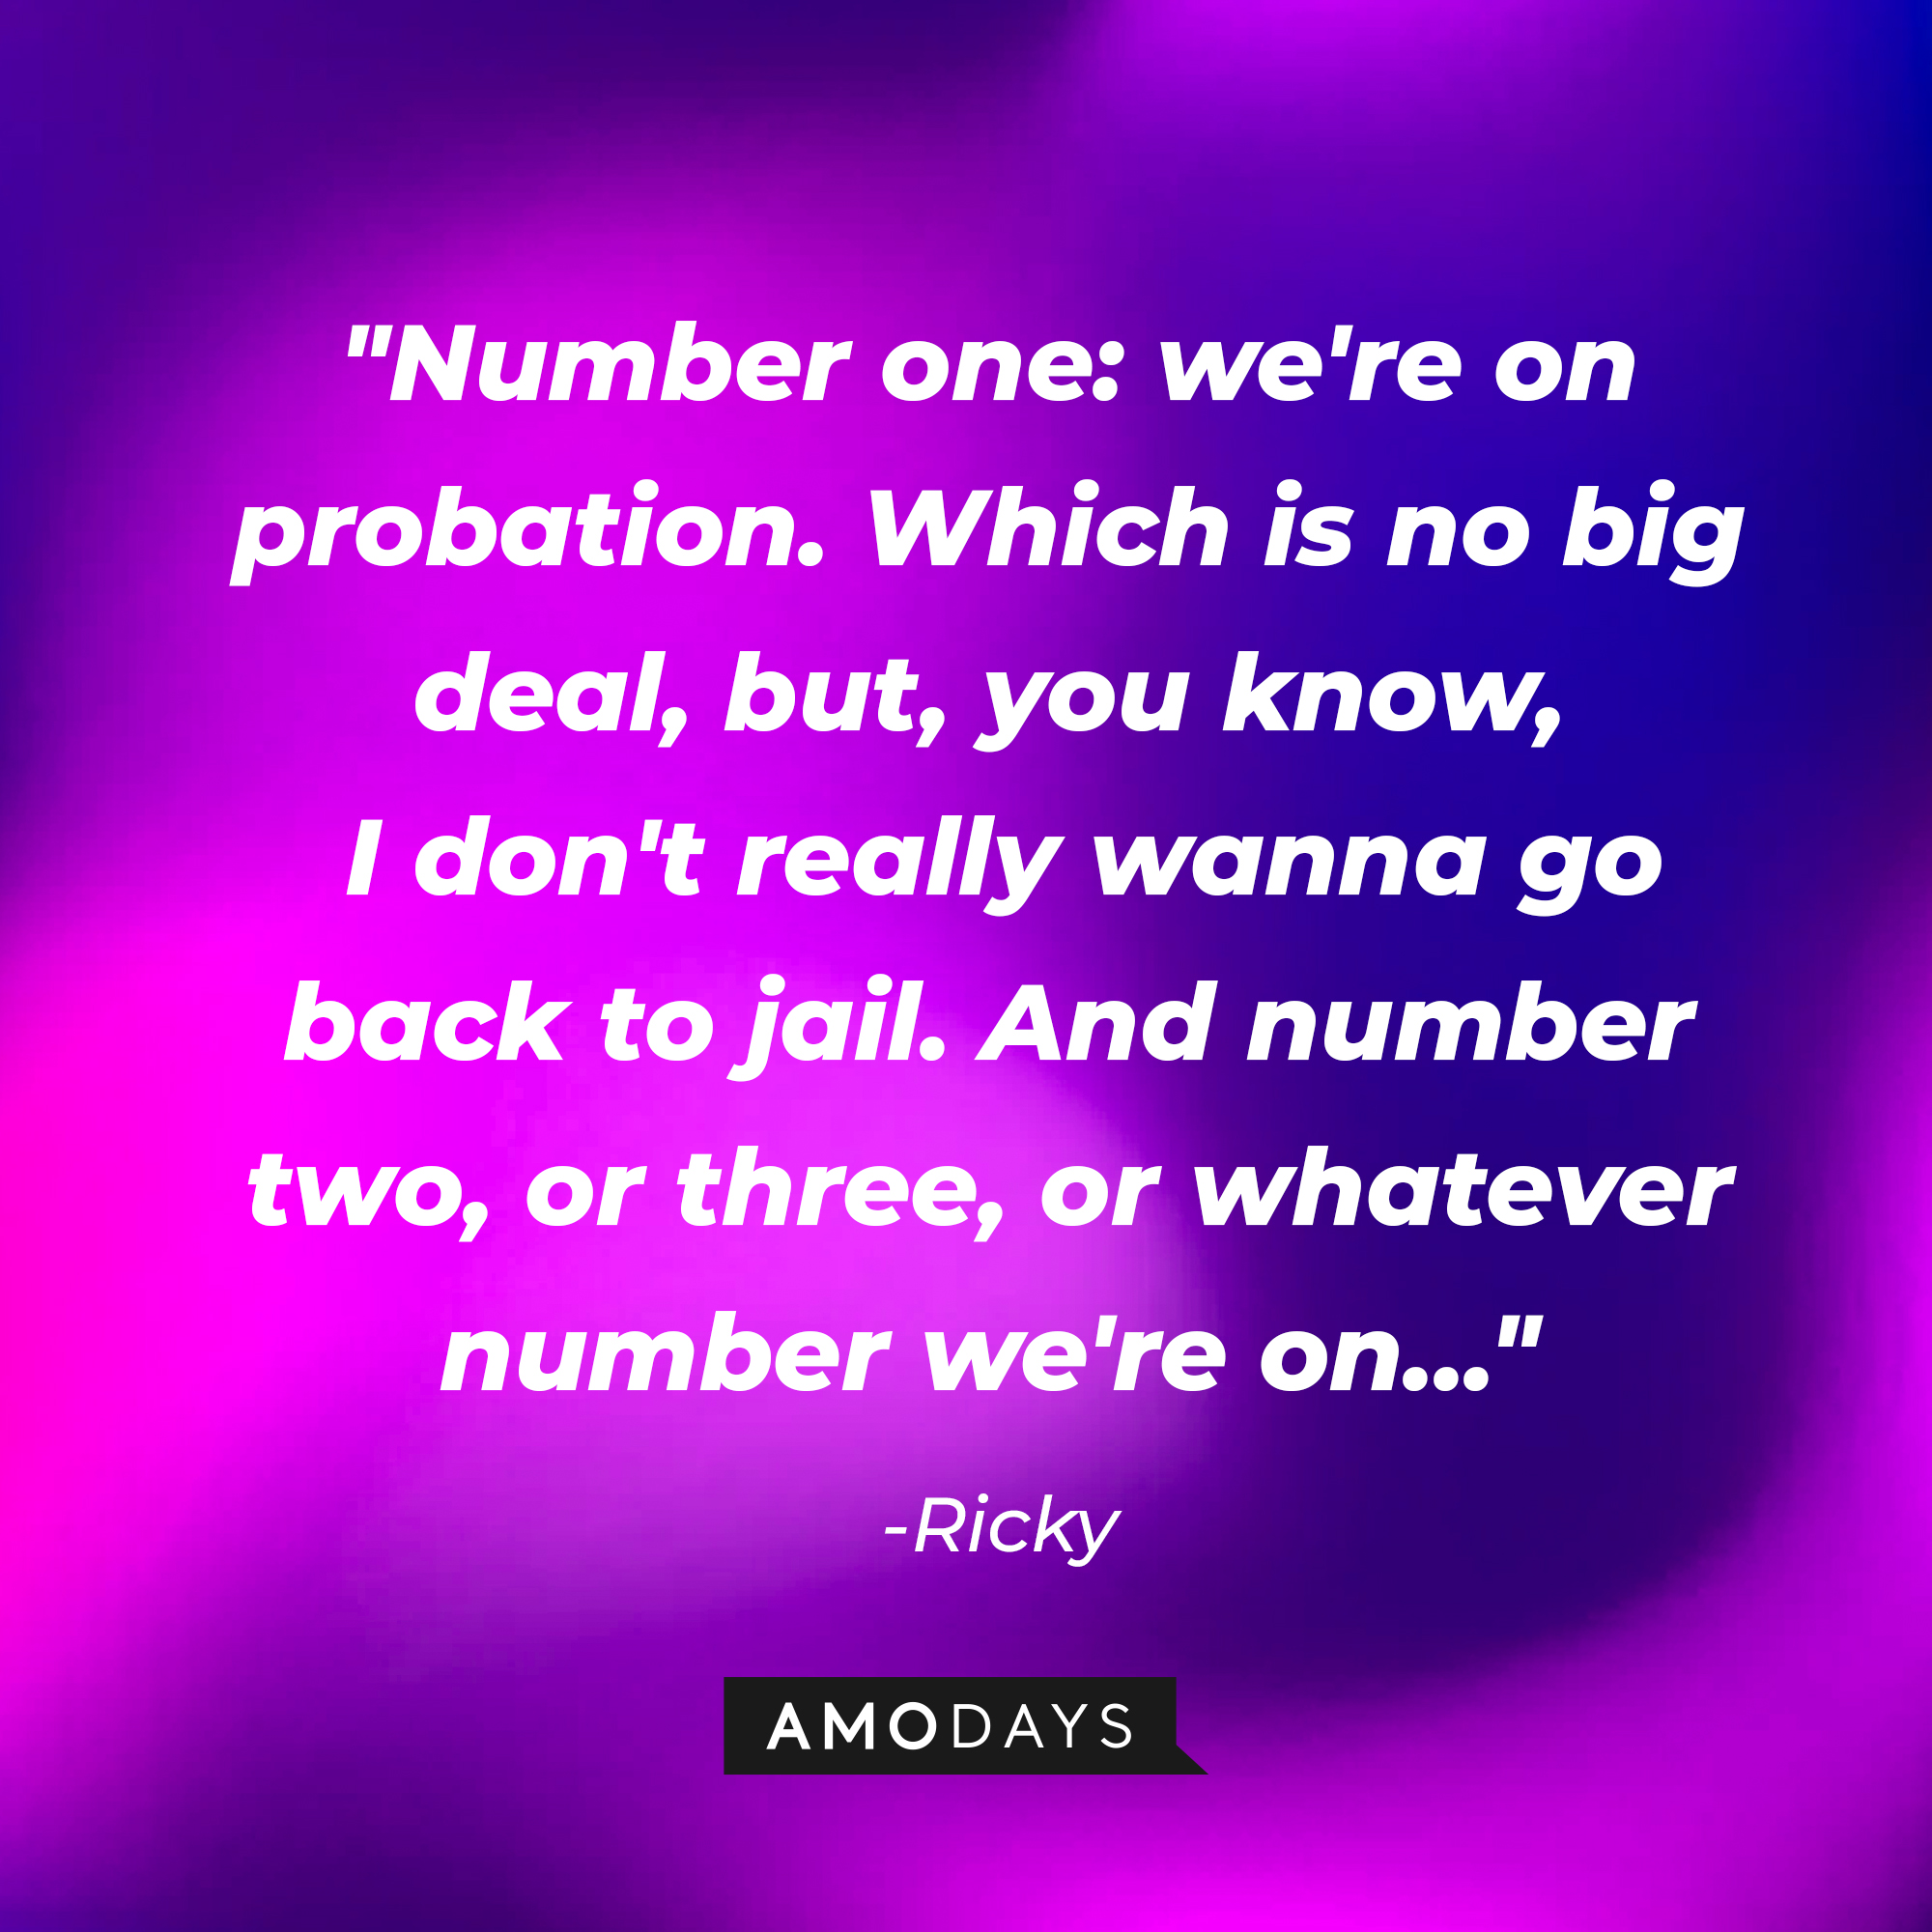 Ricky's quote, "Number one: we're on probation. Which is no big deal, but, you know, I don't really wanna go back to jail. And number two, or three, or whatever number we're on…." | Source: AmoDays